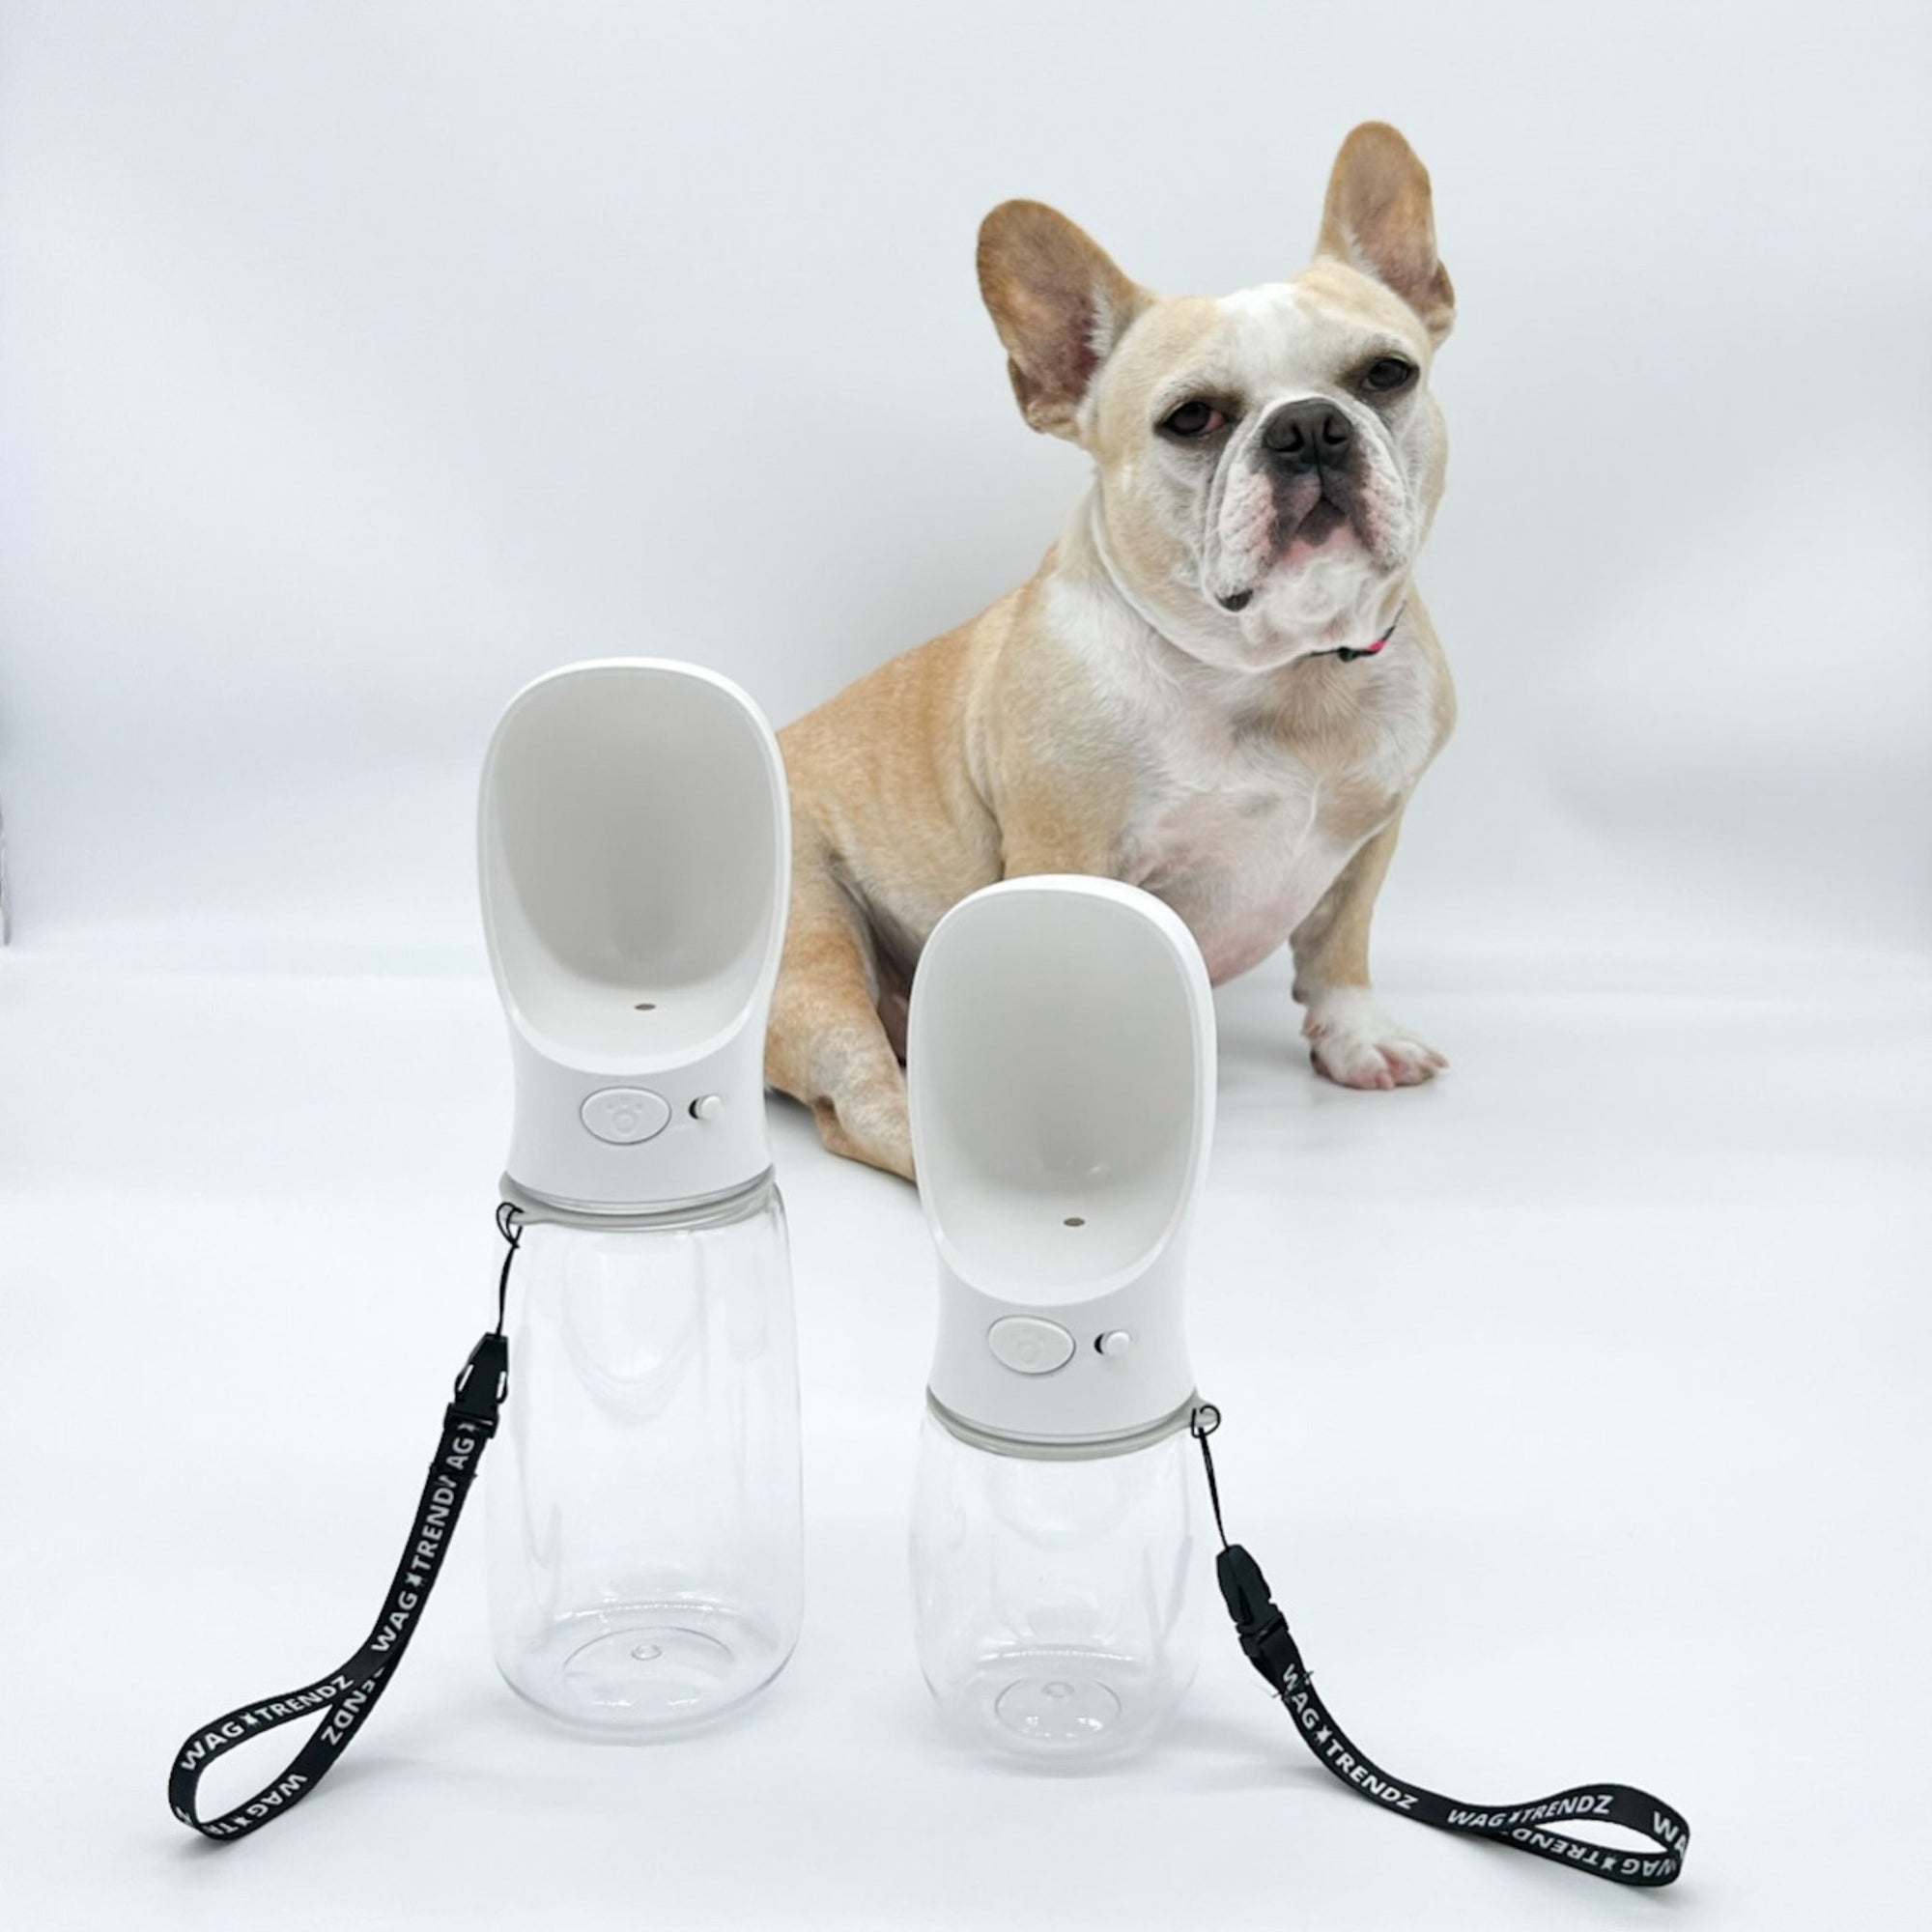 Dog Portable Water Bottle - white with black &amp; white logo strap - large and small with French Bulldog in the background against solid white background - Wag Trendz